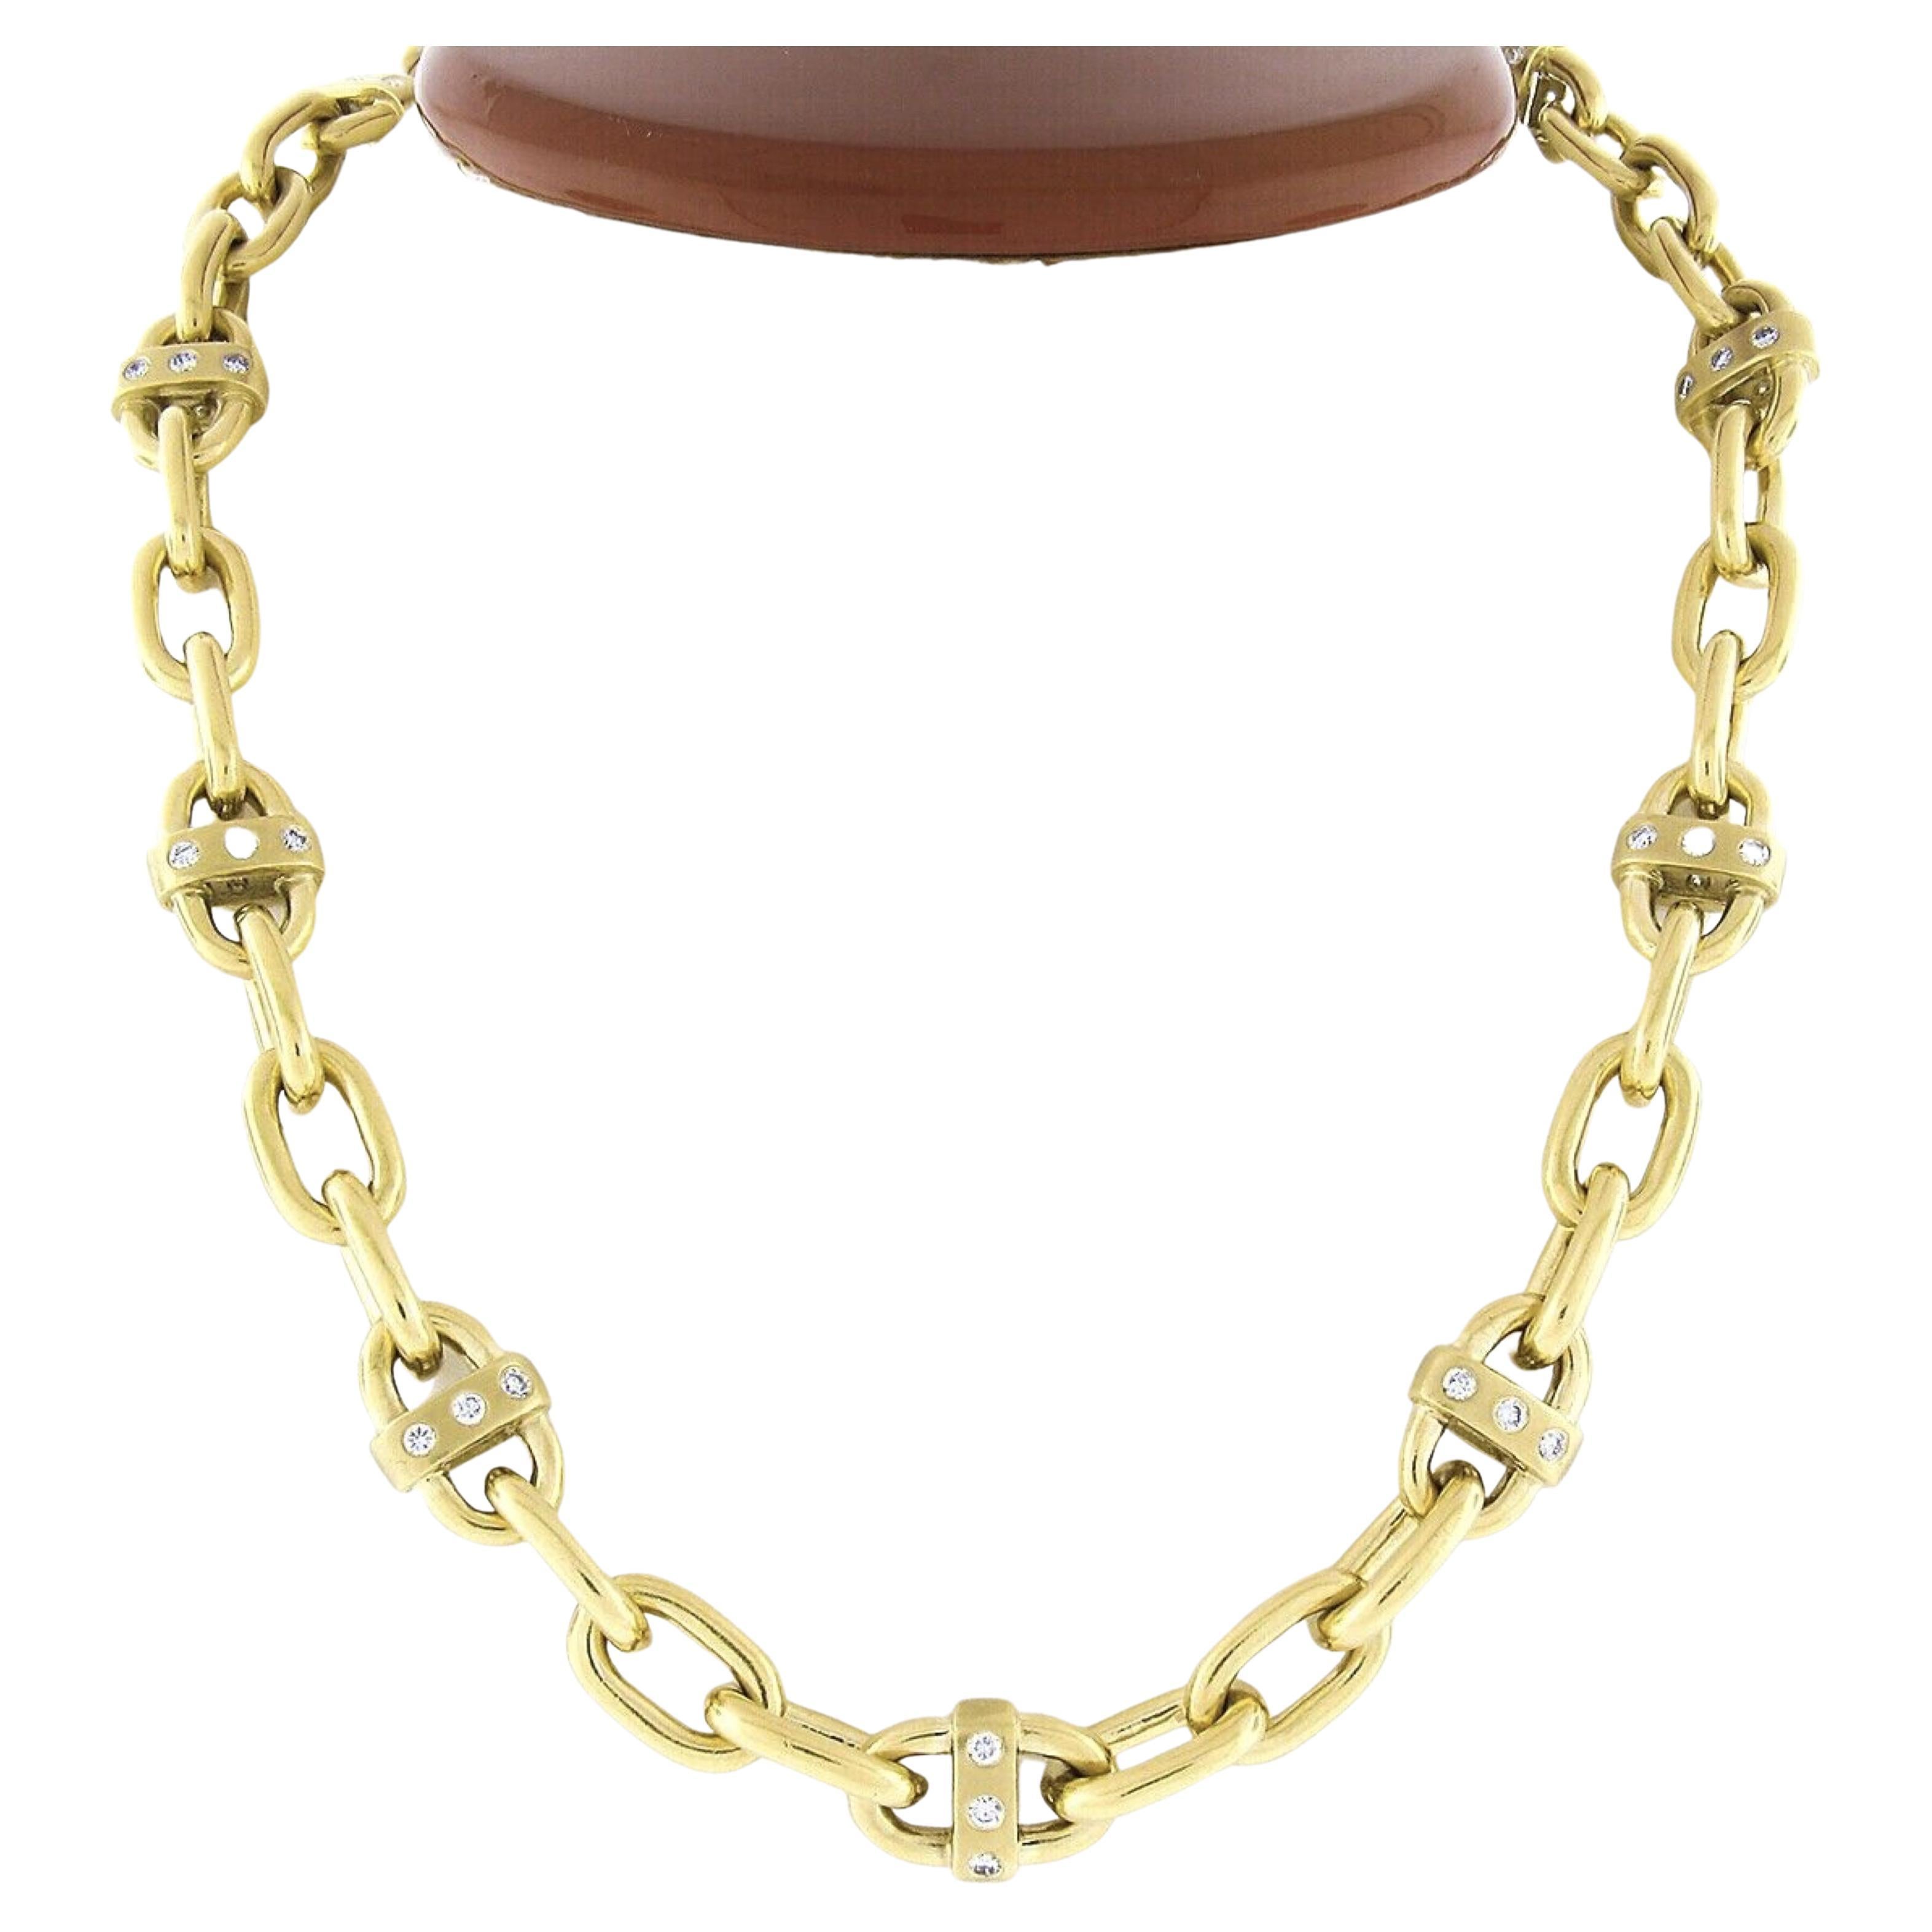 18K Gold 18" Diamond Cable Chain Link 3.50ctw Choker Necklace w/ Toggle Clasp For Sale